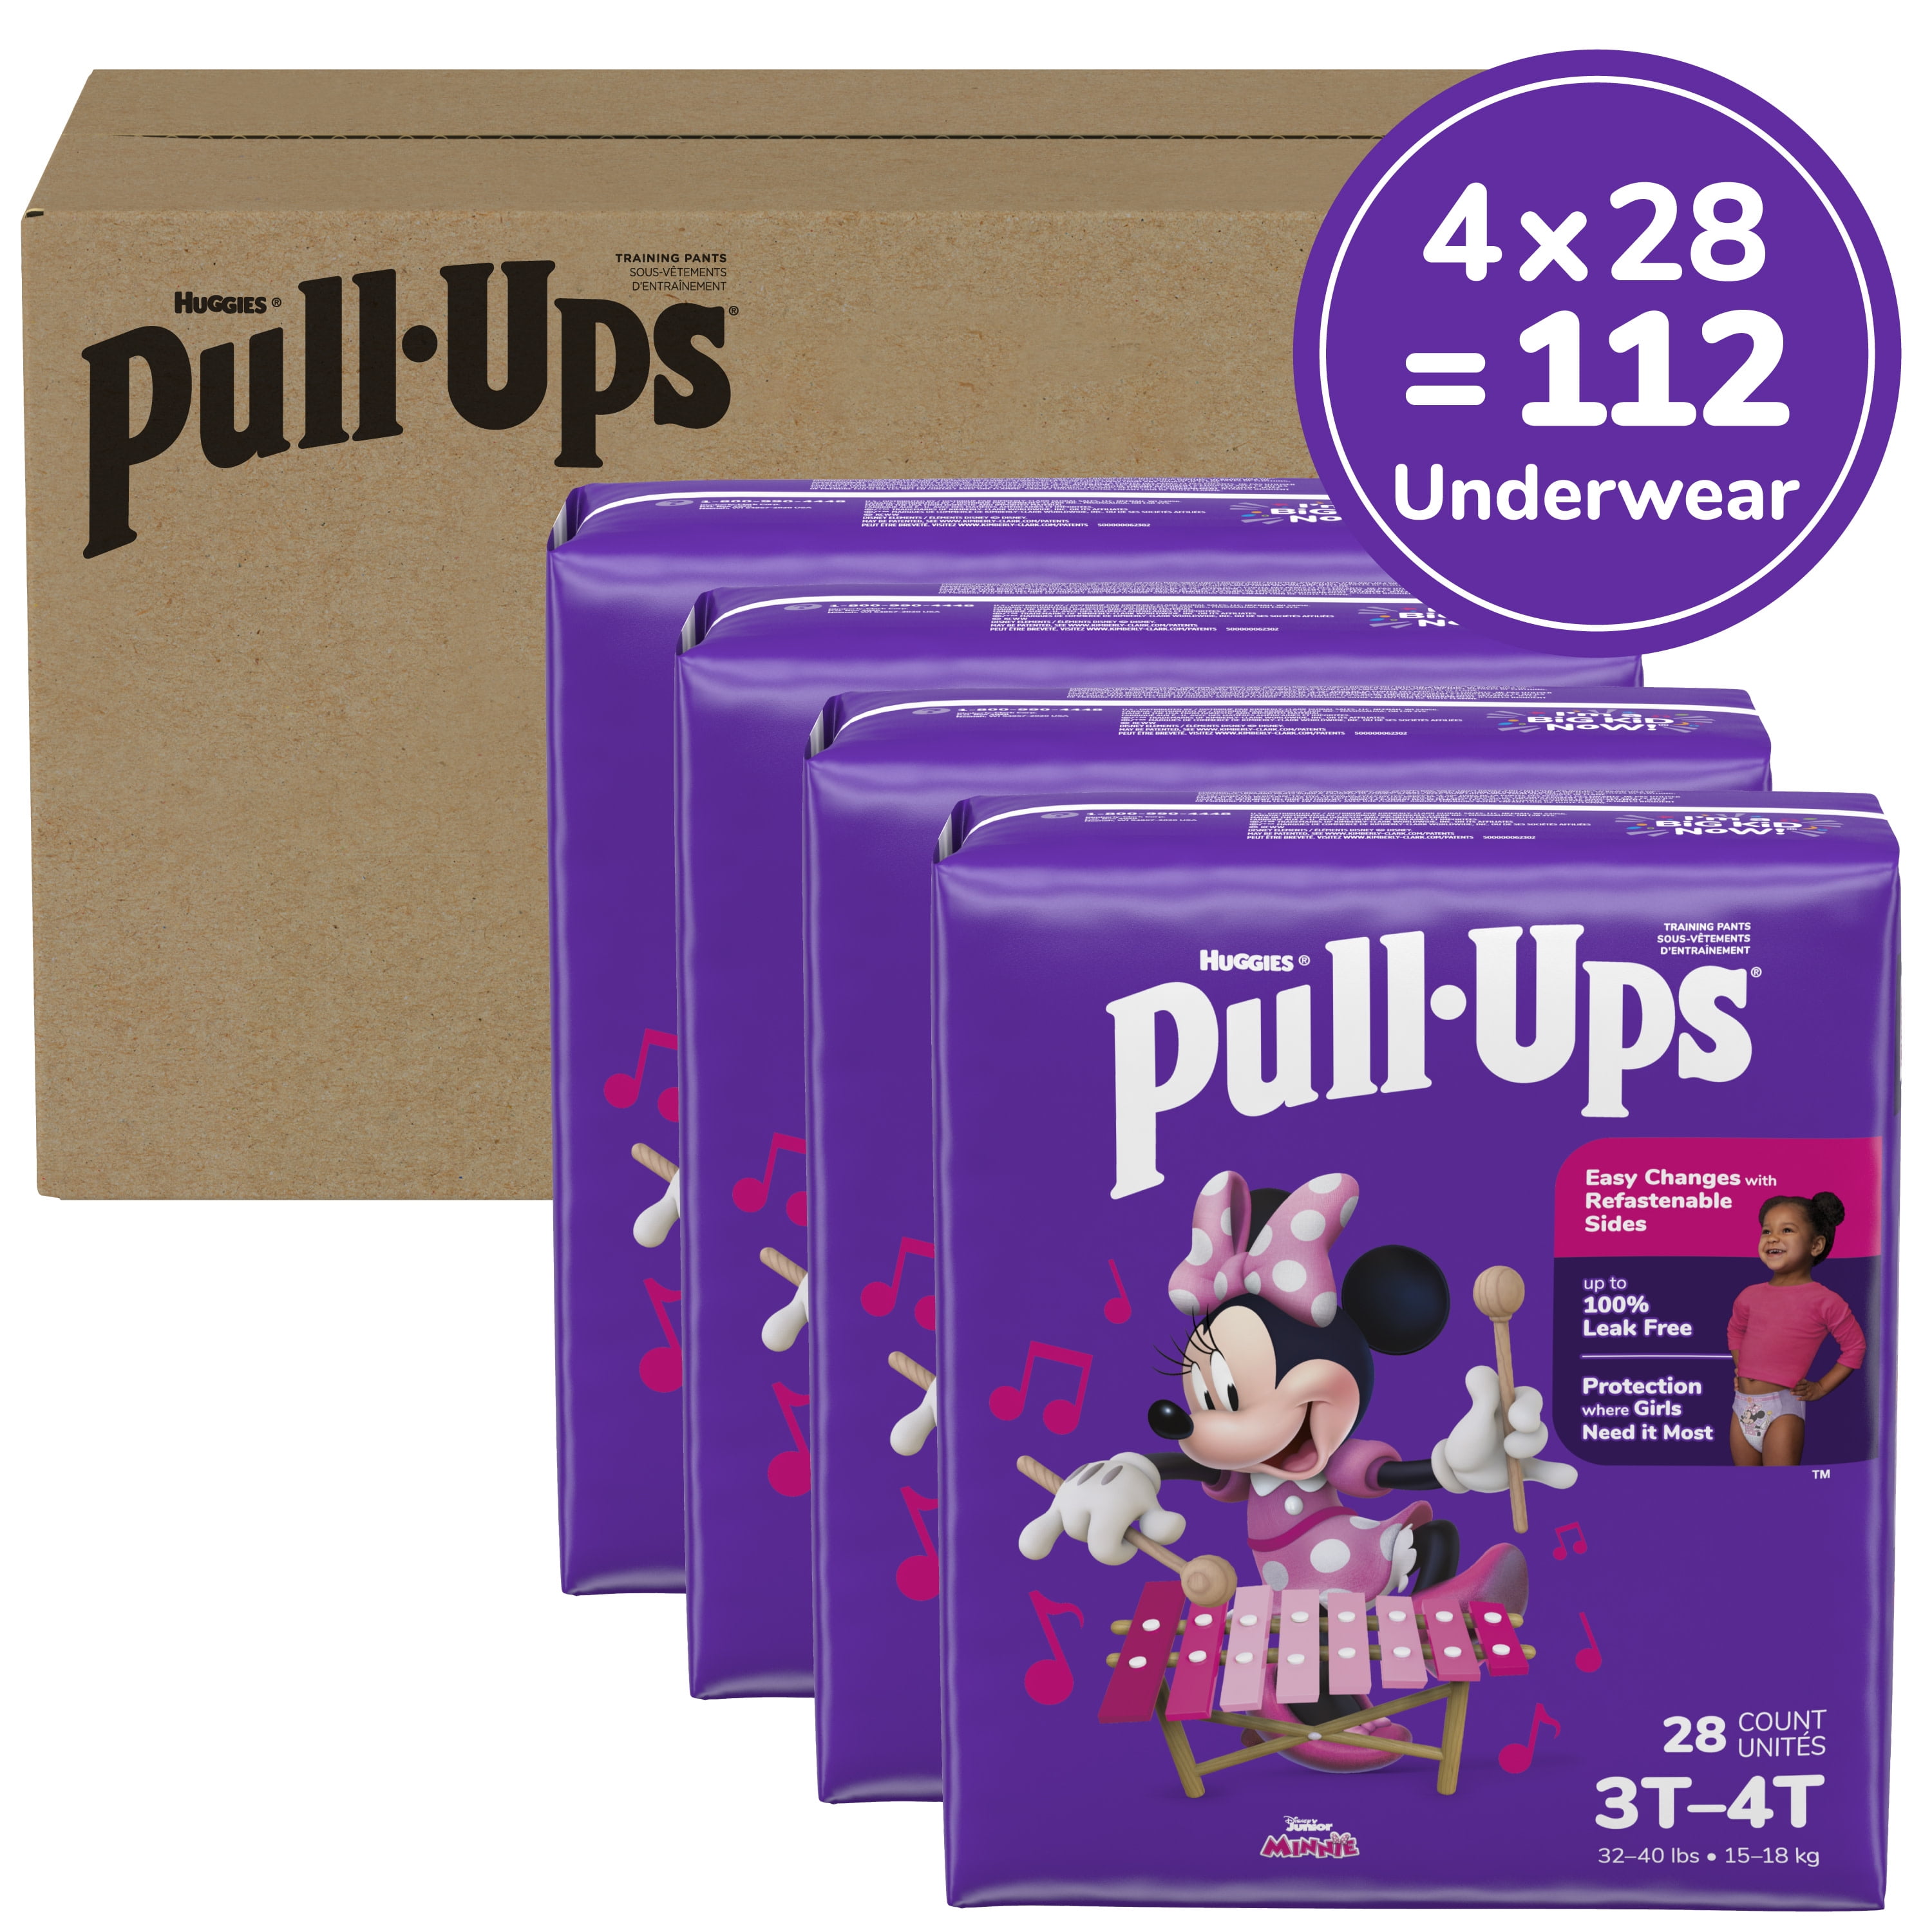 Pull-Ups Night-Time Girls' Potty Training Pants, 3T-4T (32-40 lbs), 20 ct -  King Soopers